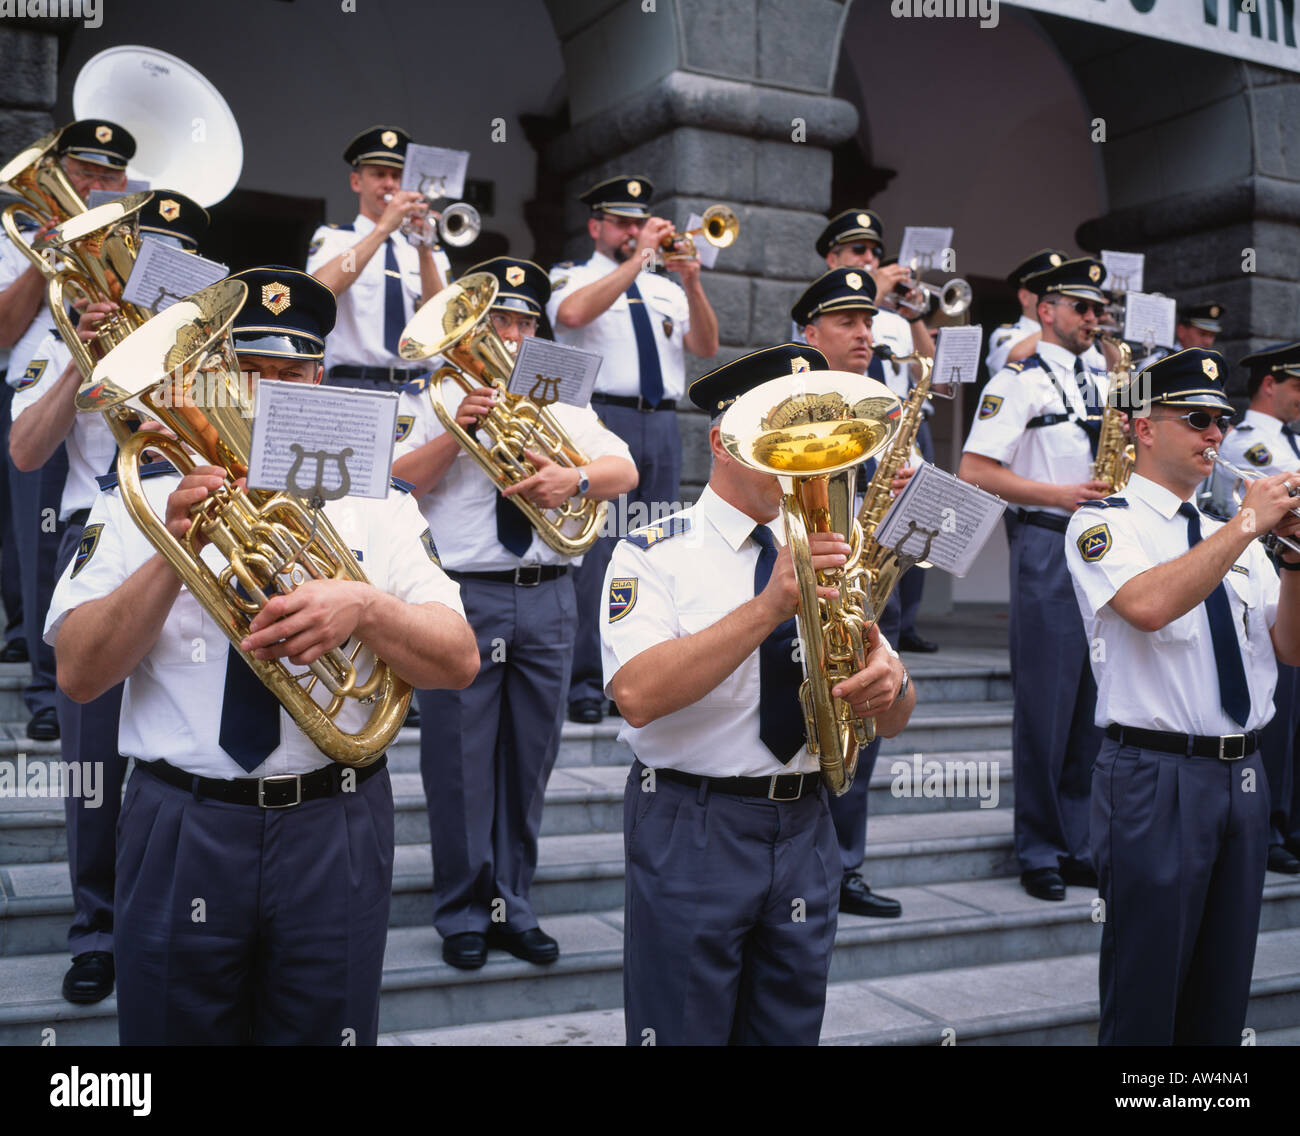 Police Brass Band playing on the steps of the City Hall, Ljubljana, Slovenia Stock Photo